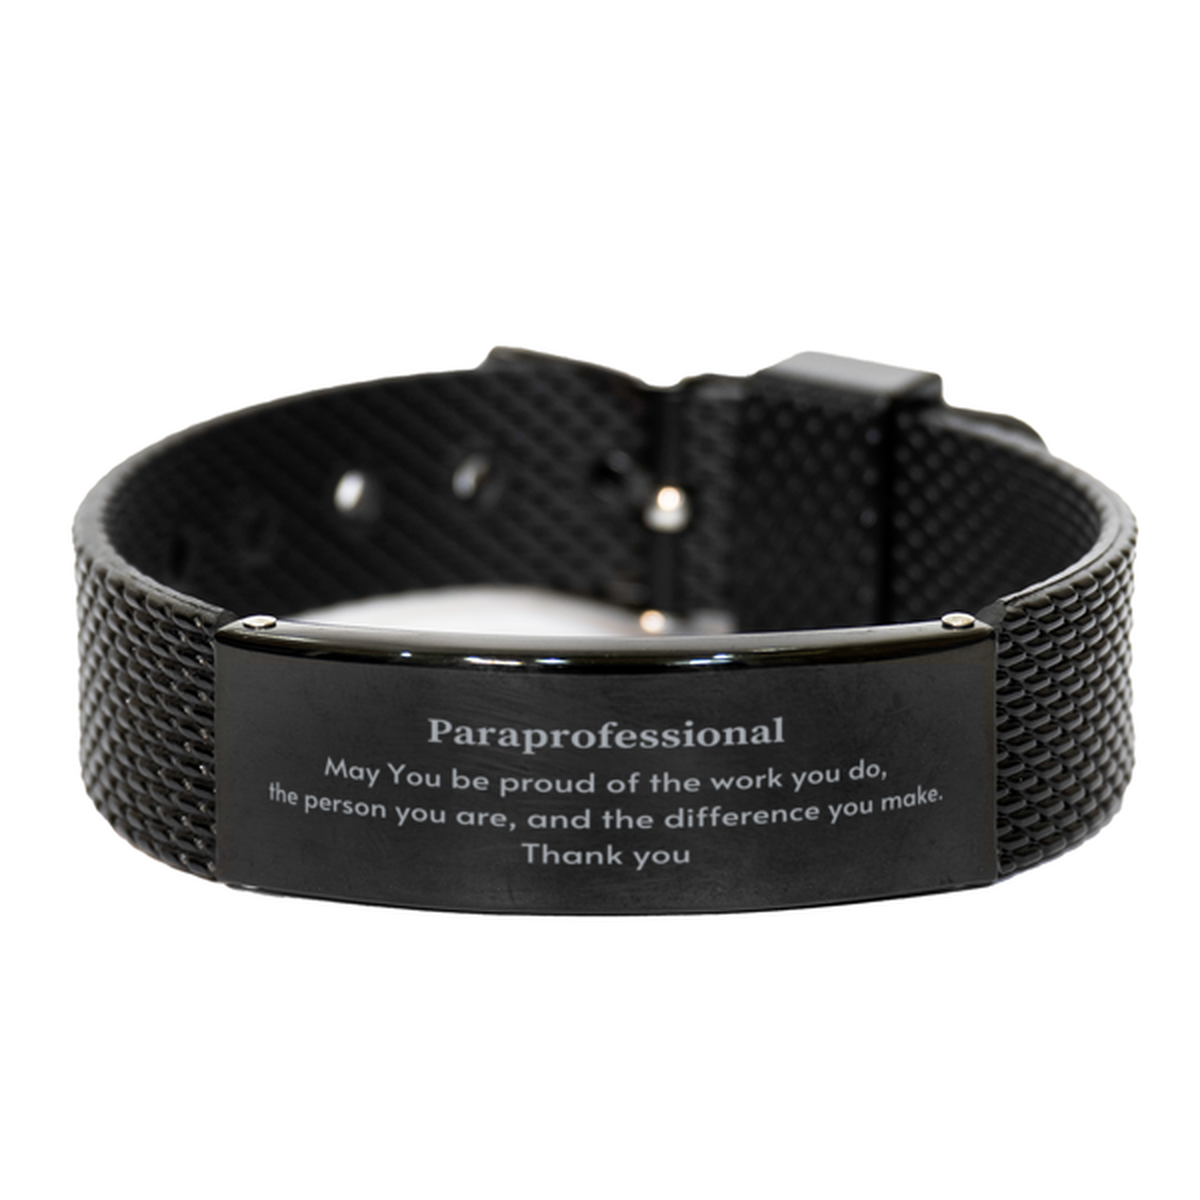 Heartwarming Black Shark Mesh Bracelet Retirement Coworkers Gifts for Paraprofessional, Paraprofessional May You be proud of the work you do, the person you are Gifts for Boss Men Women Friends